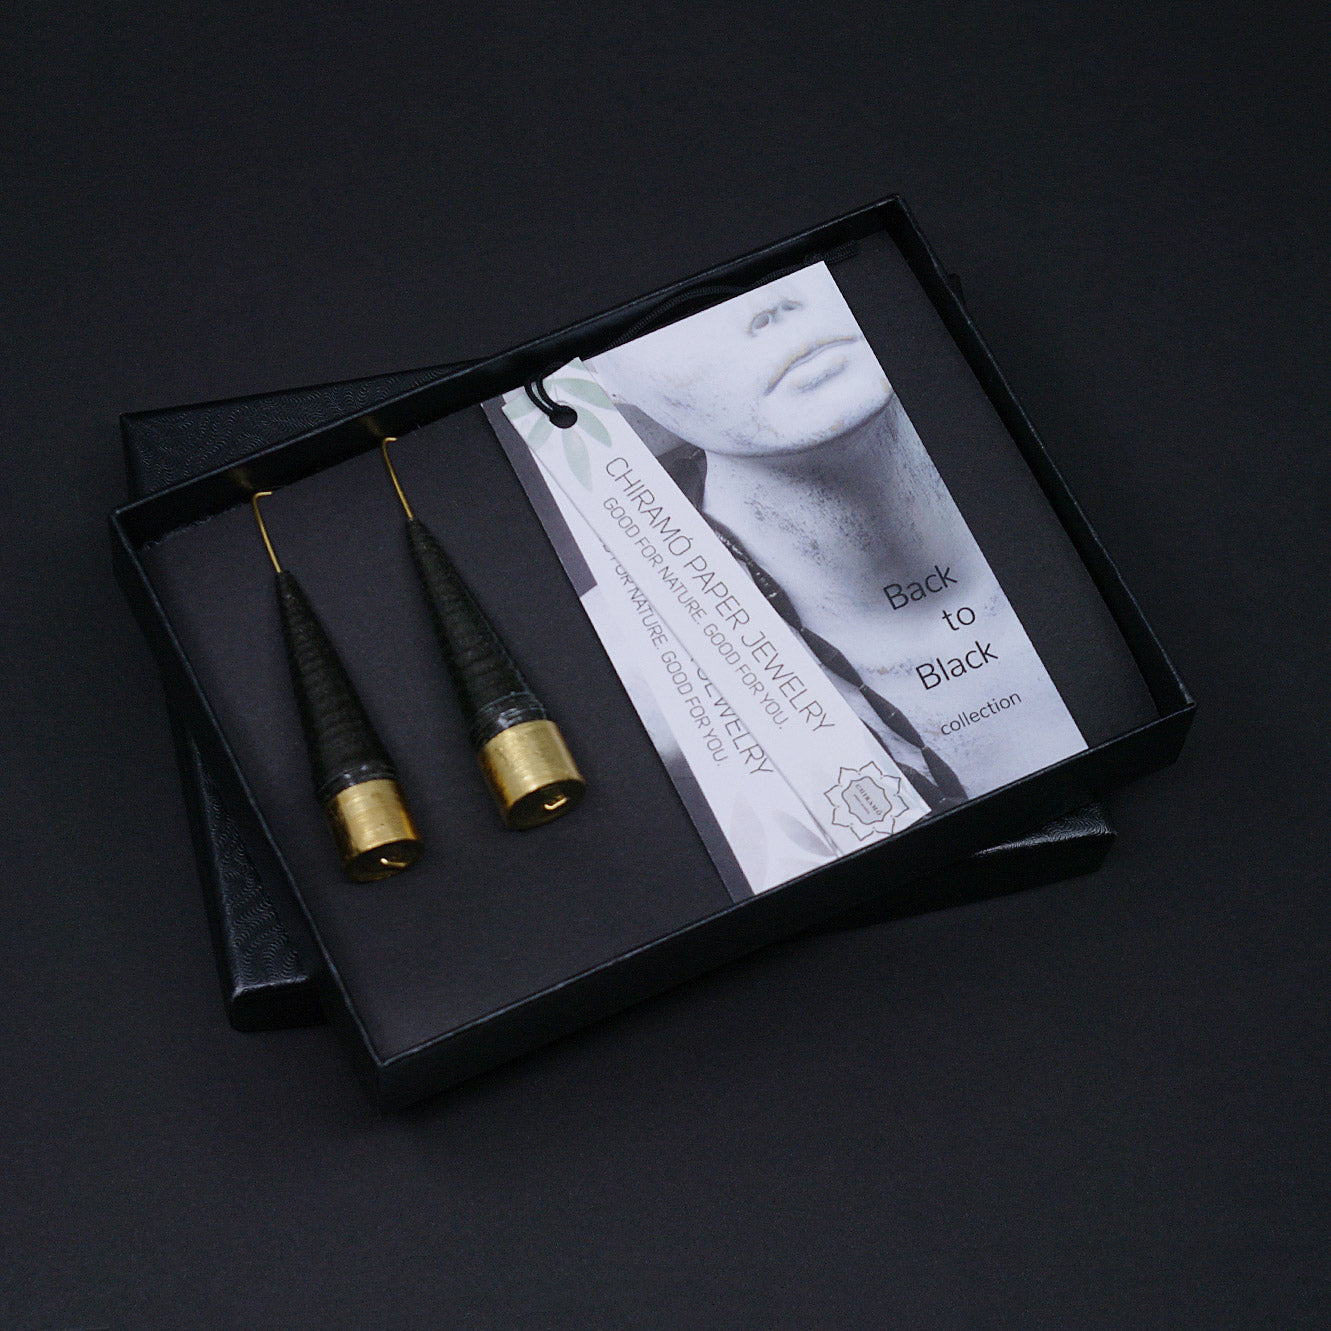 Black and Gold Conical Paper Rings by Chiramo Paper Jewelry Back to Black Collection Cardboard Jewelry Box